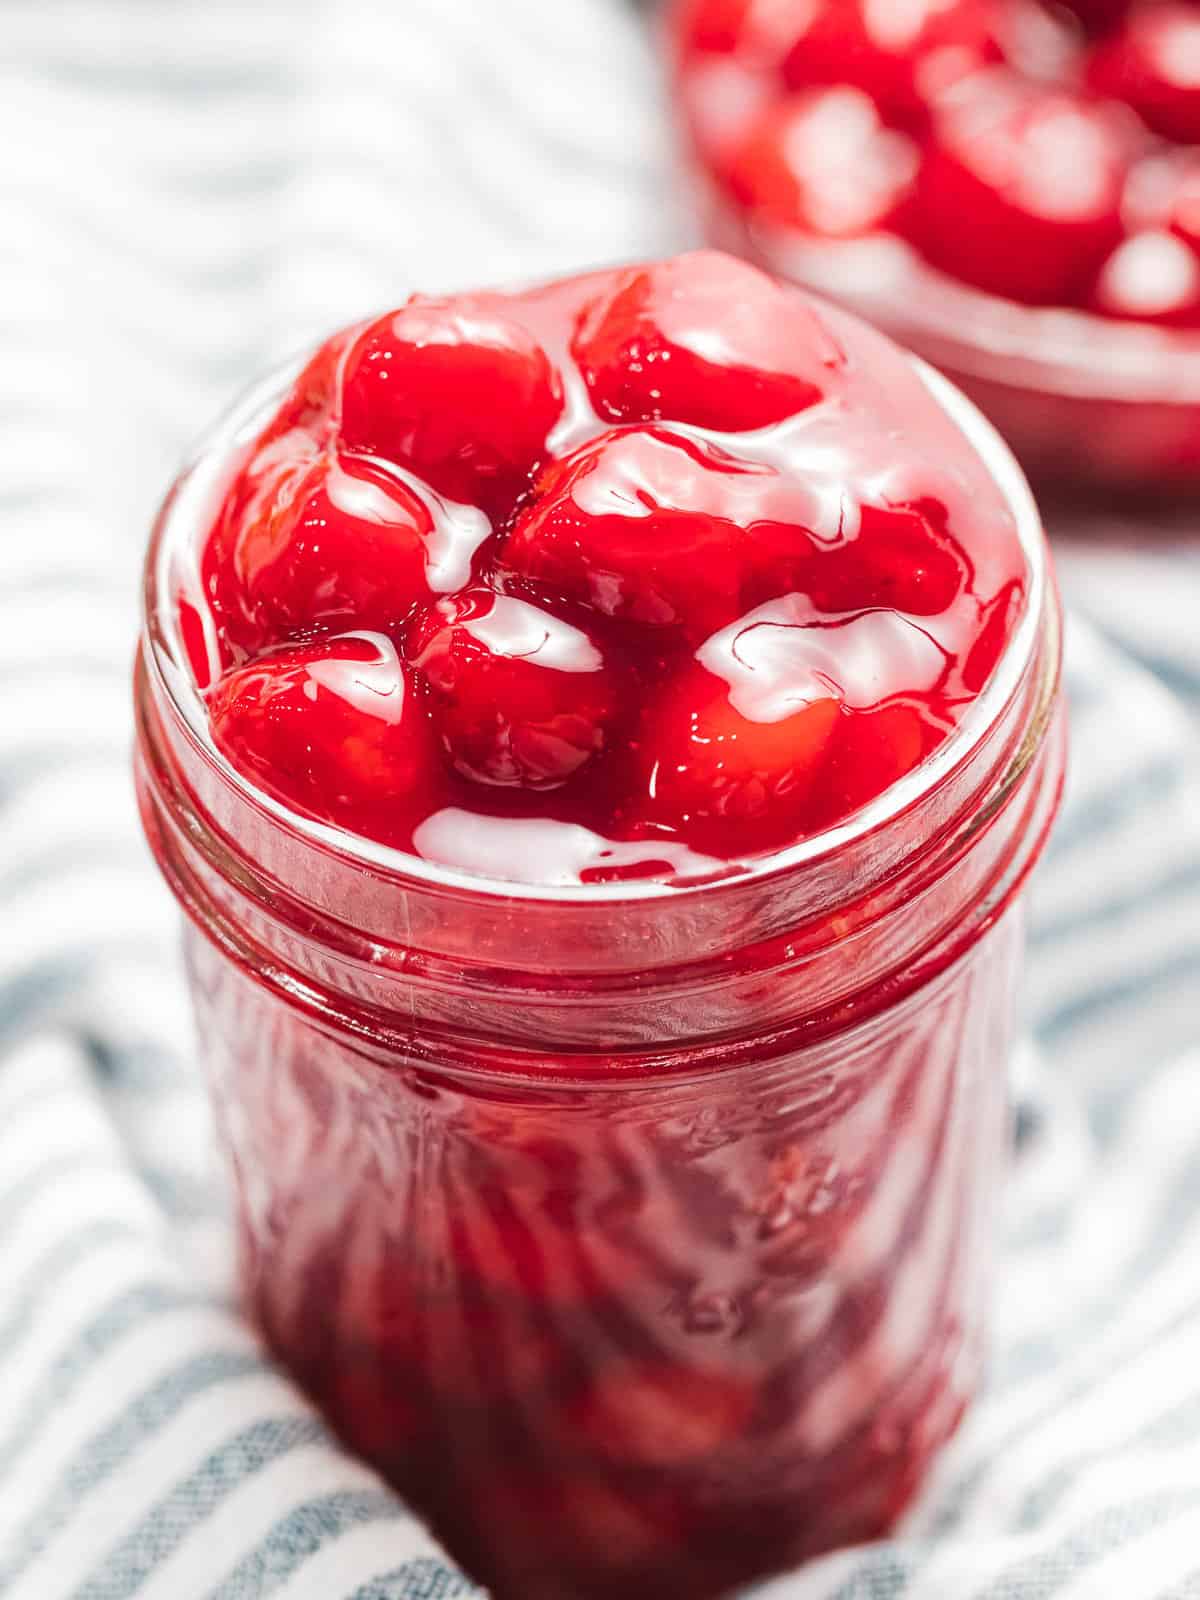 Cherry pie filling with red cherries in a glass jar.